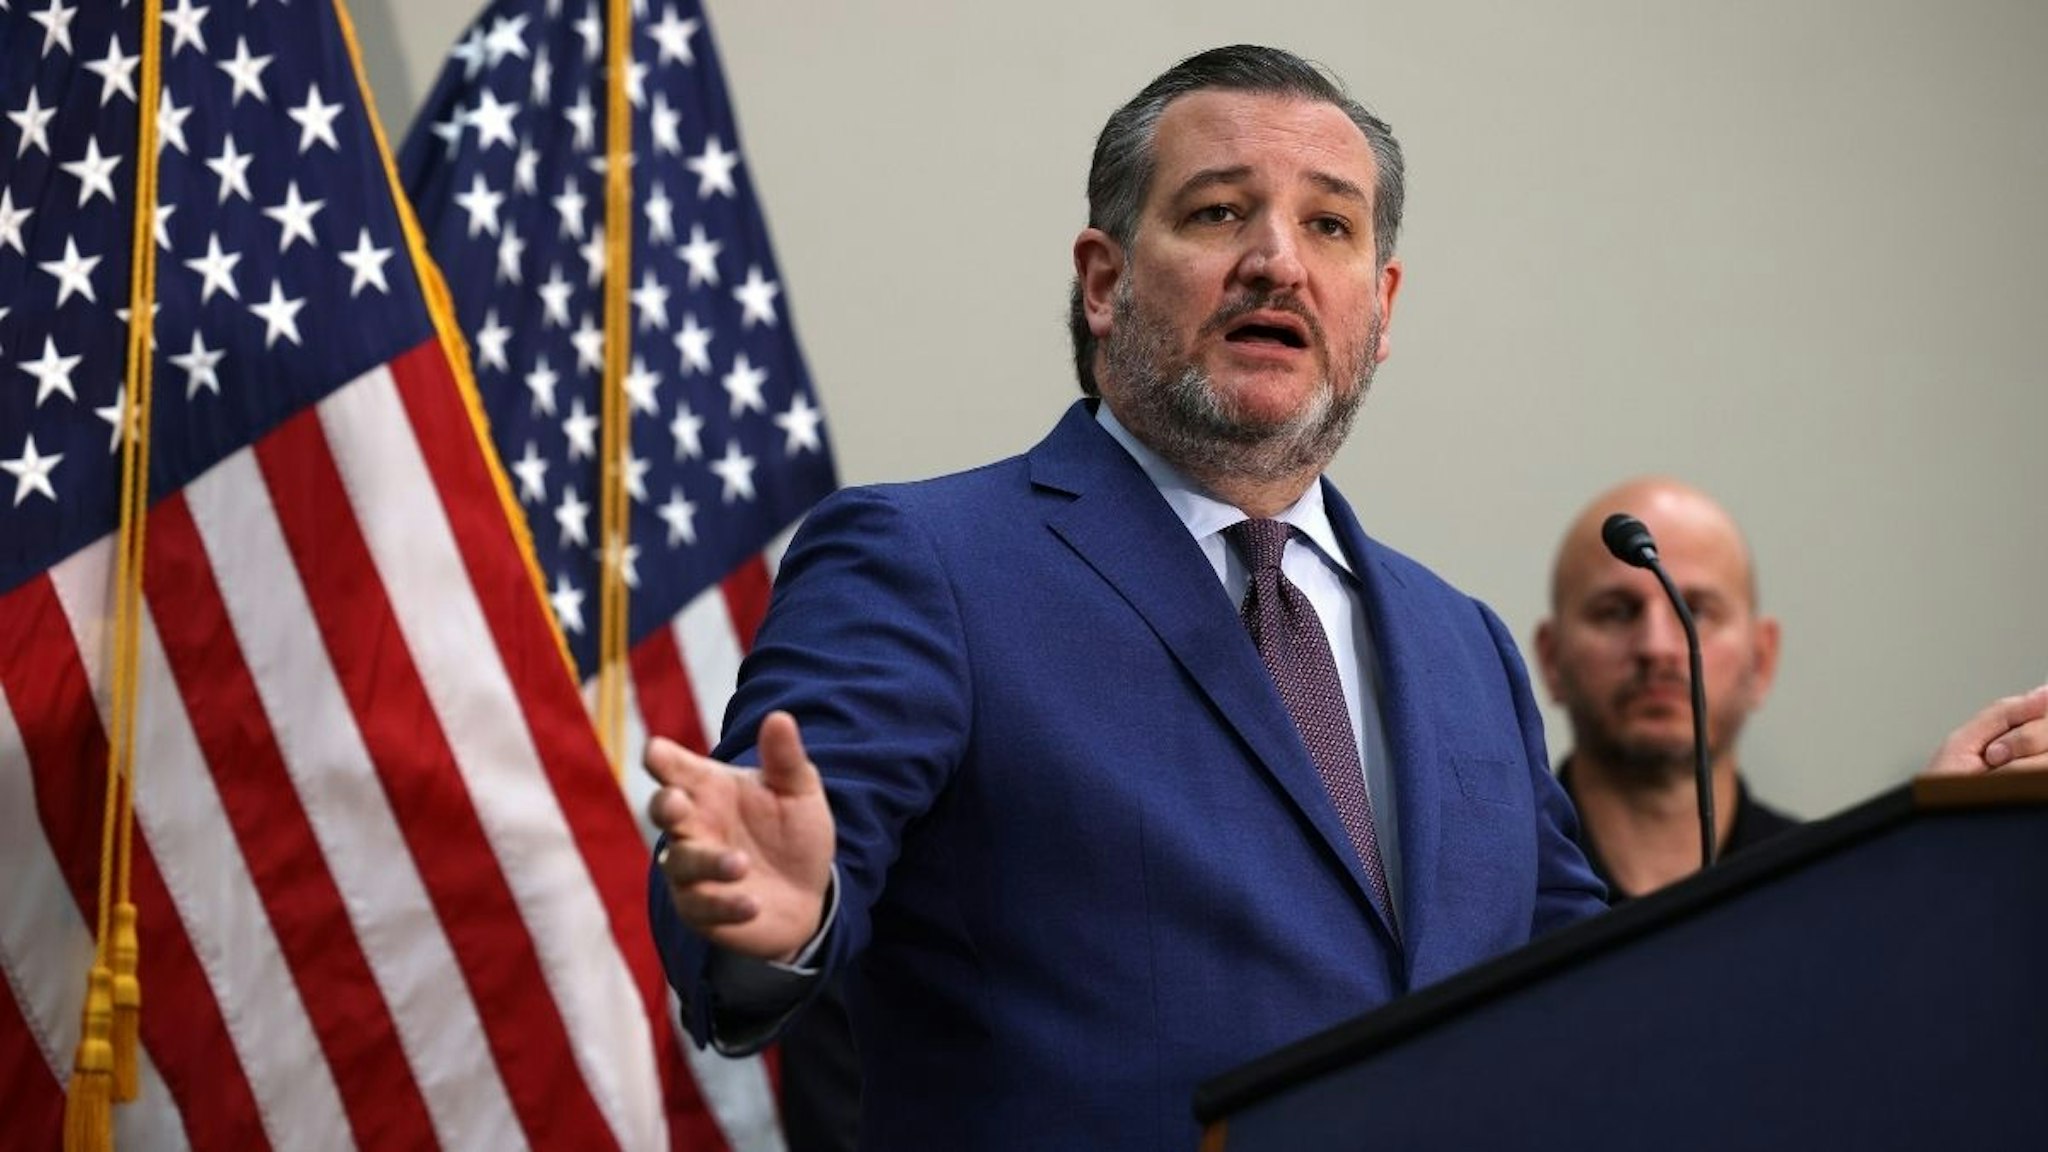 Sen. Ted Cruz (R-TX) gestures as he speaks during a news conference on the U.S. Southern Border and President Joe Biden’s immigration policies, in the Hart Senate Office Building on May 12, 2021 in Washington, DC.